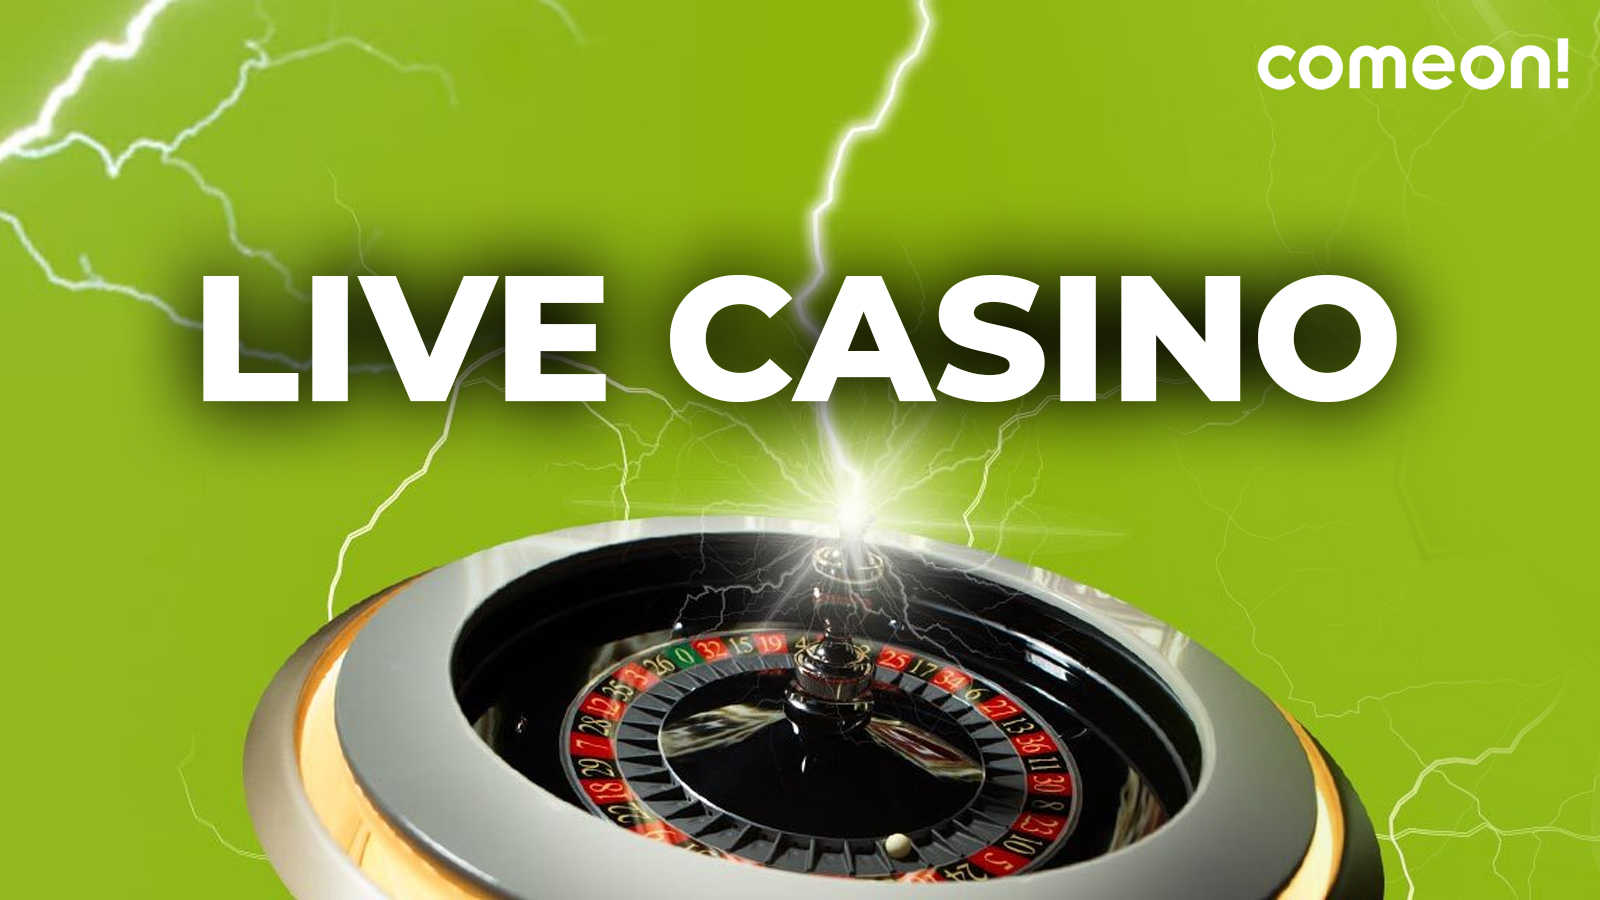 Play casino games in live mode and try to win a real dealer at Comeon Casino.